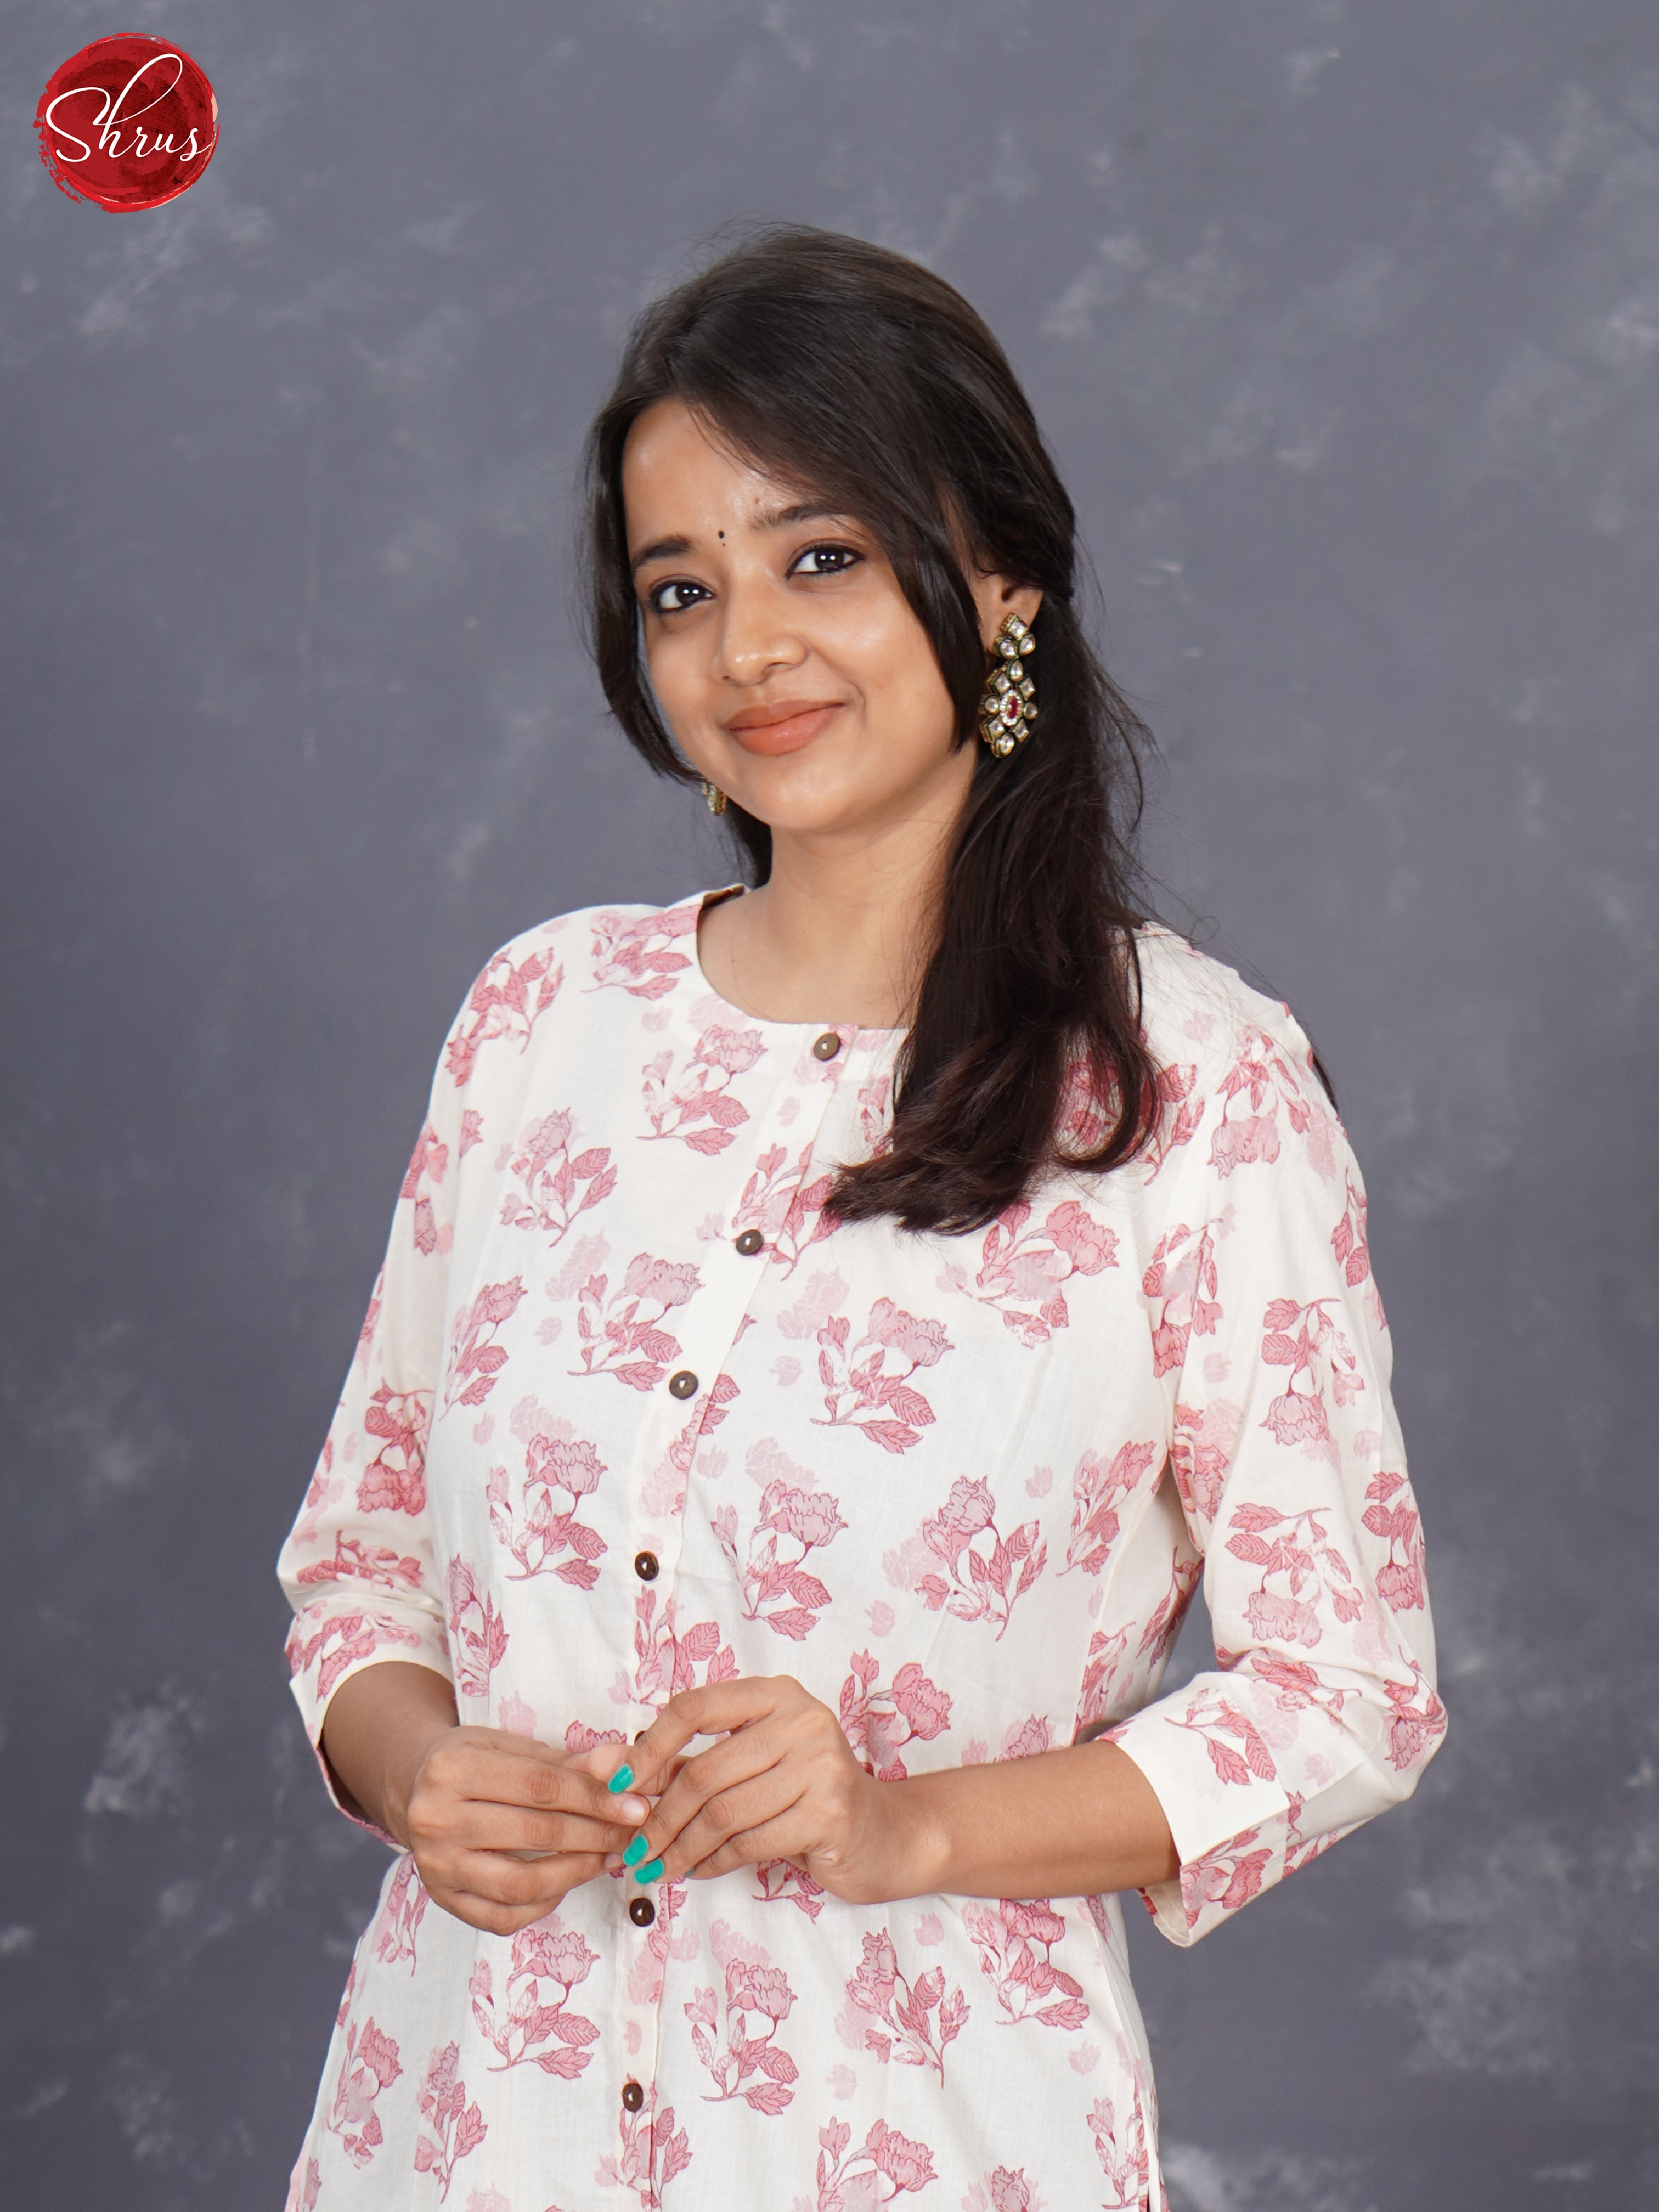 White & Pink  - Readymade kurti top with floral print - Shop on ShrusEternity.com